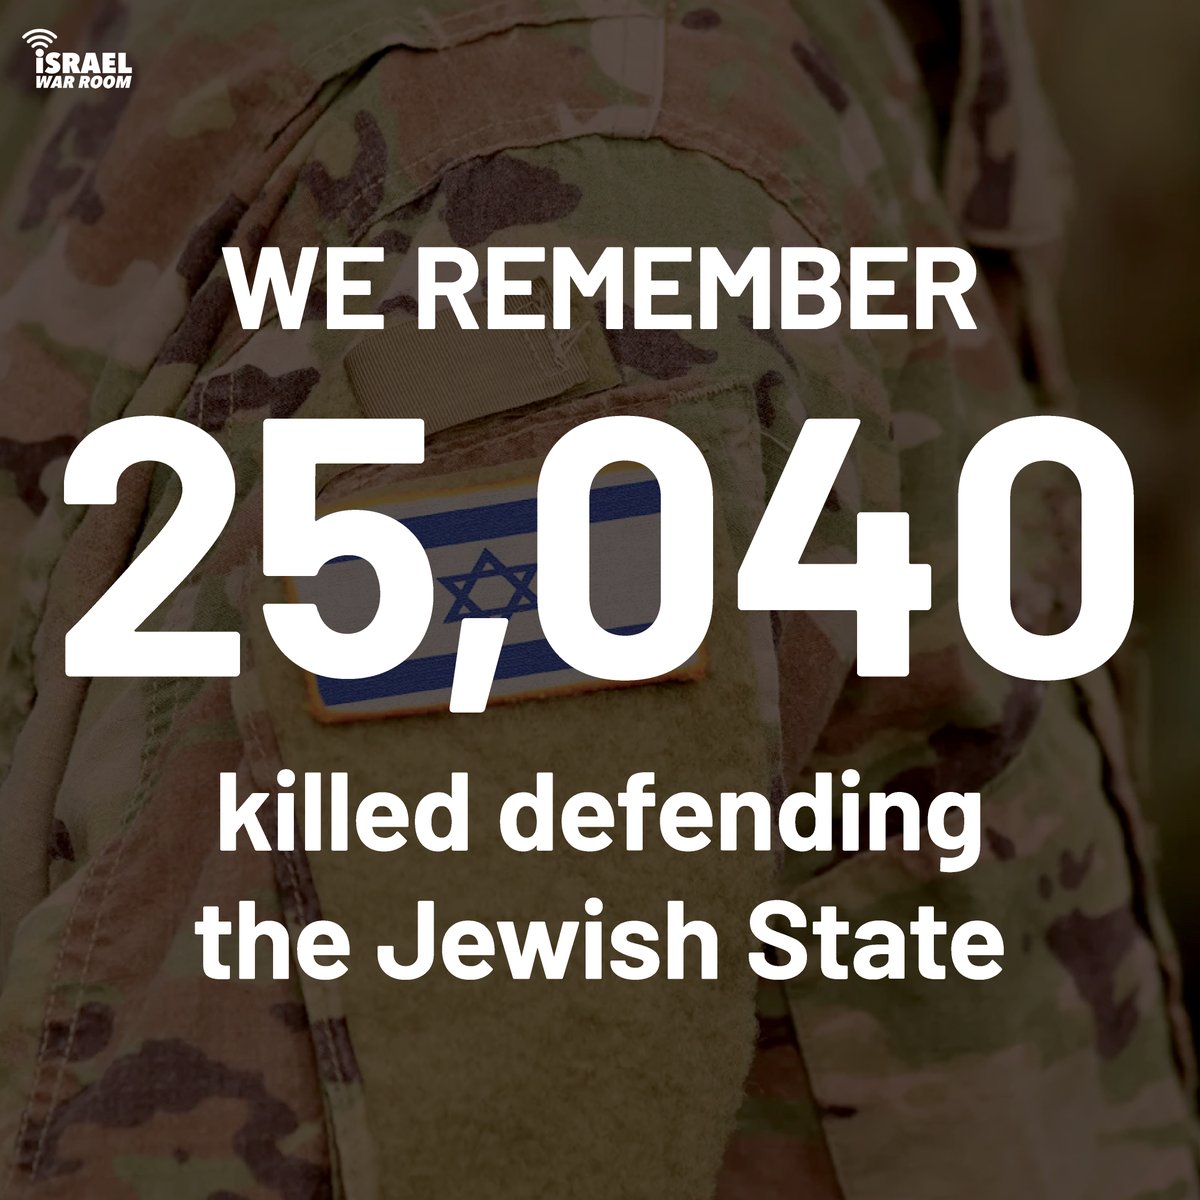 On Yom HaZikaron, we remember the 25,040 soldiers, police officers, and members of Israel's national security forces who died defending the Jewish homeland. 💔 🕯️ 🇮🇱 במותם ציוו לנו את החיים — In their death they commanded us to live.